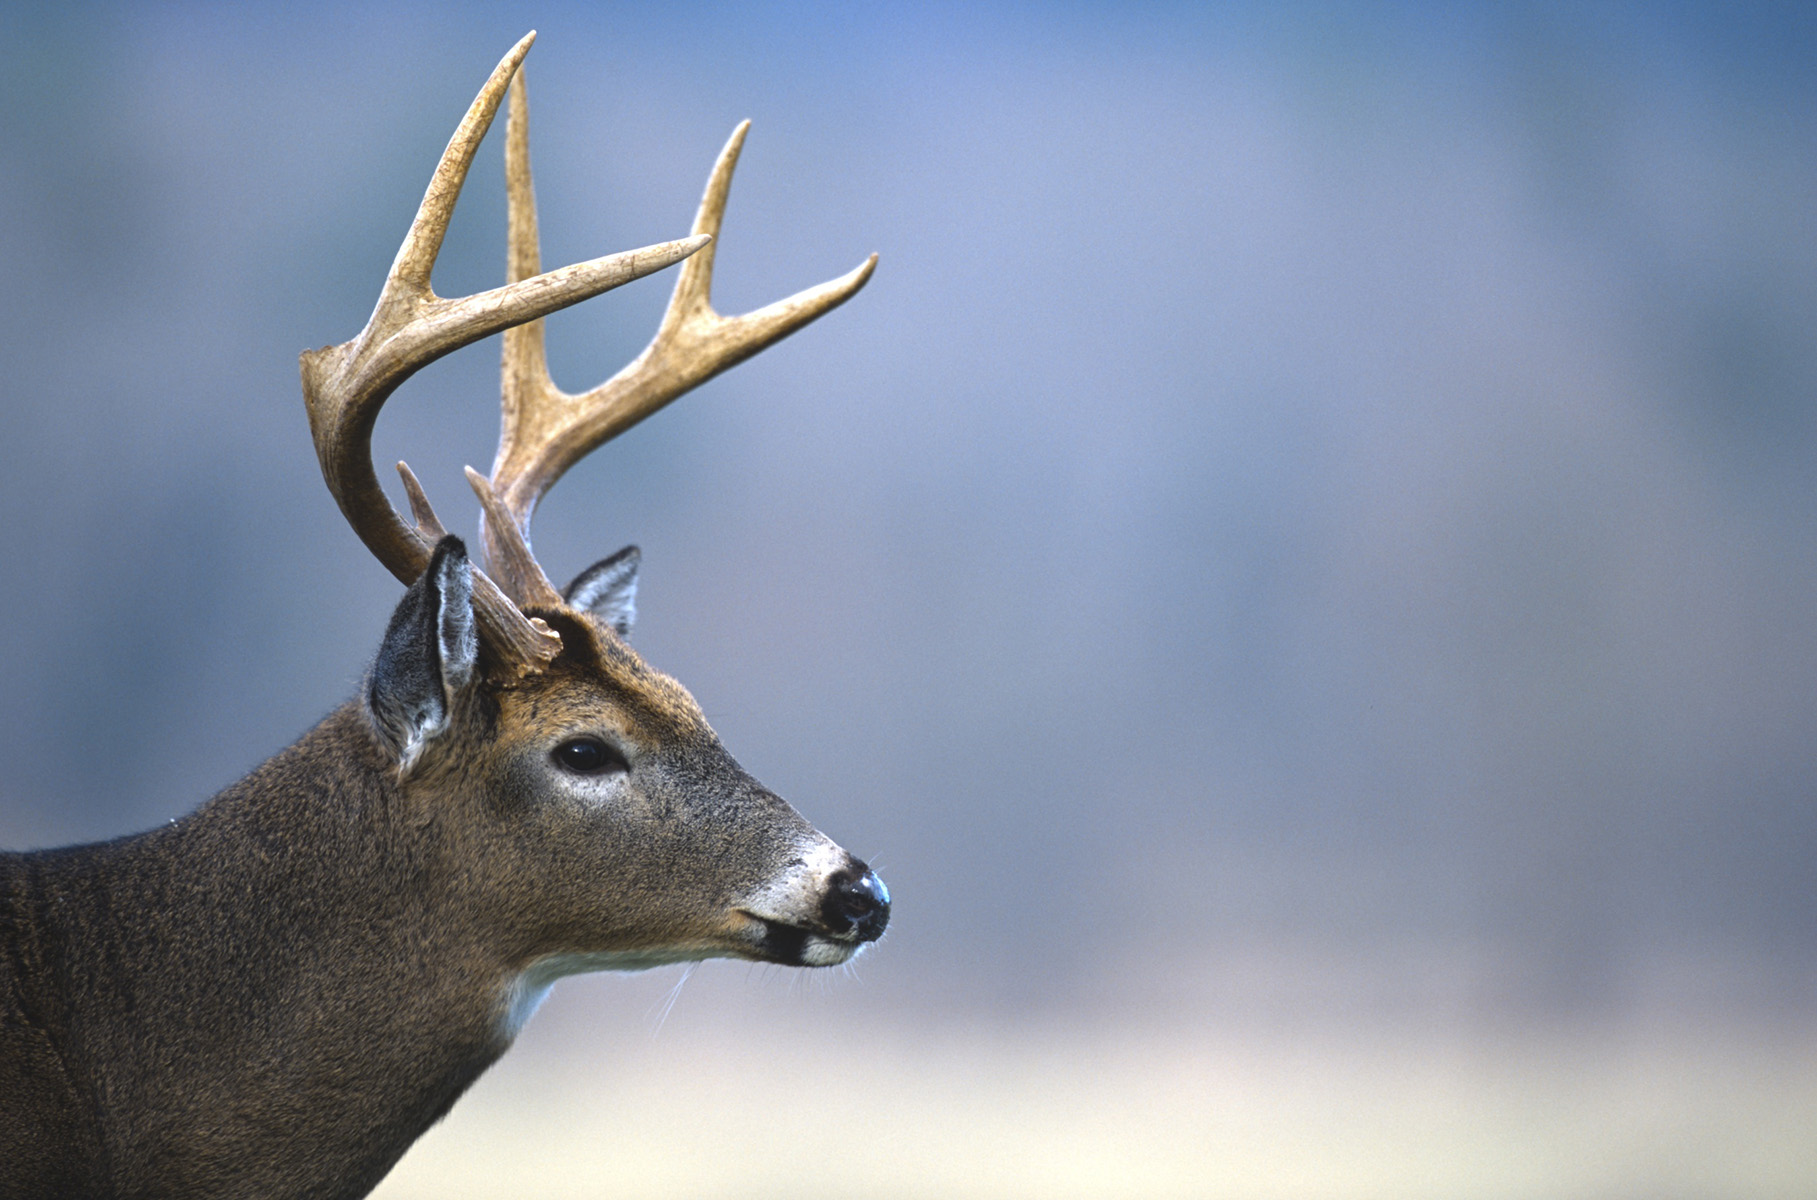 N.C. Wildlife Resources Commission reports additional cases of Chronic Wasting Disease